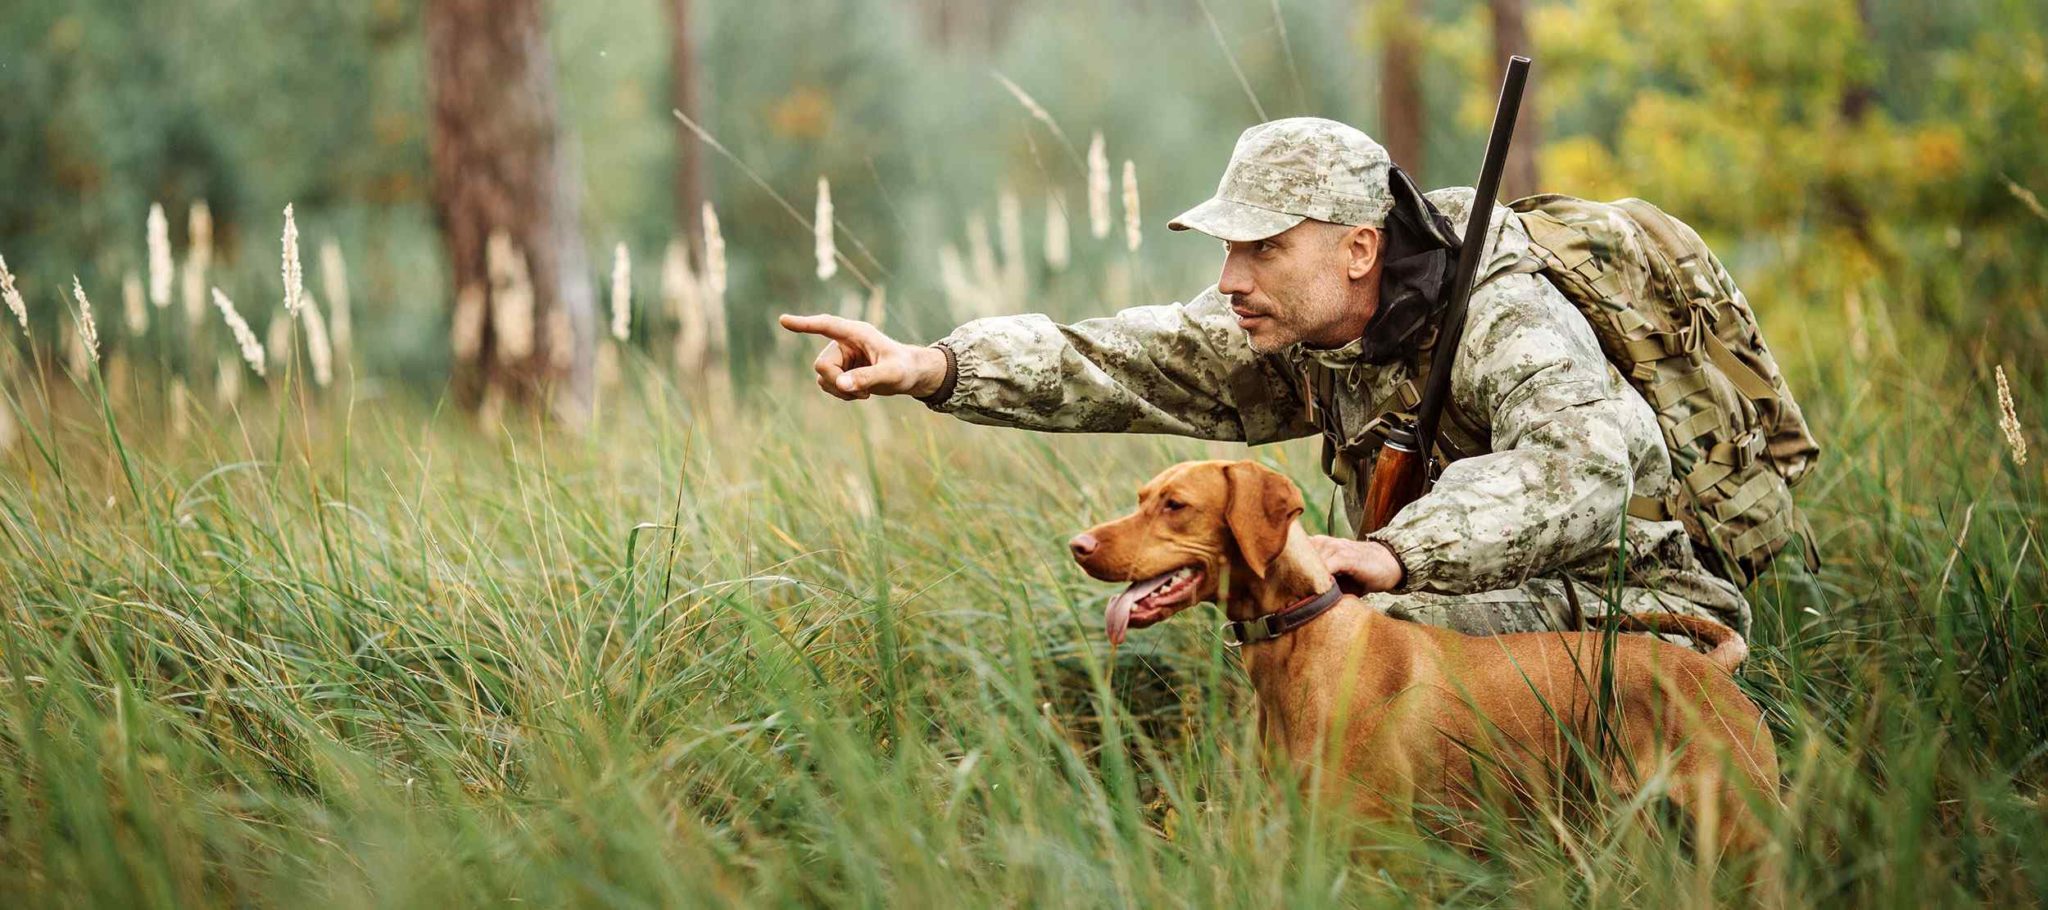 Best Hunting Safety Course New York (NY) in 2022